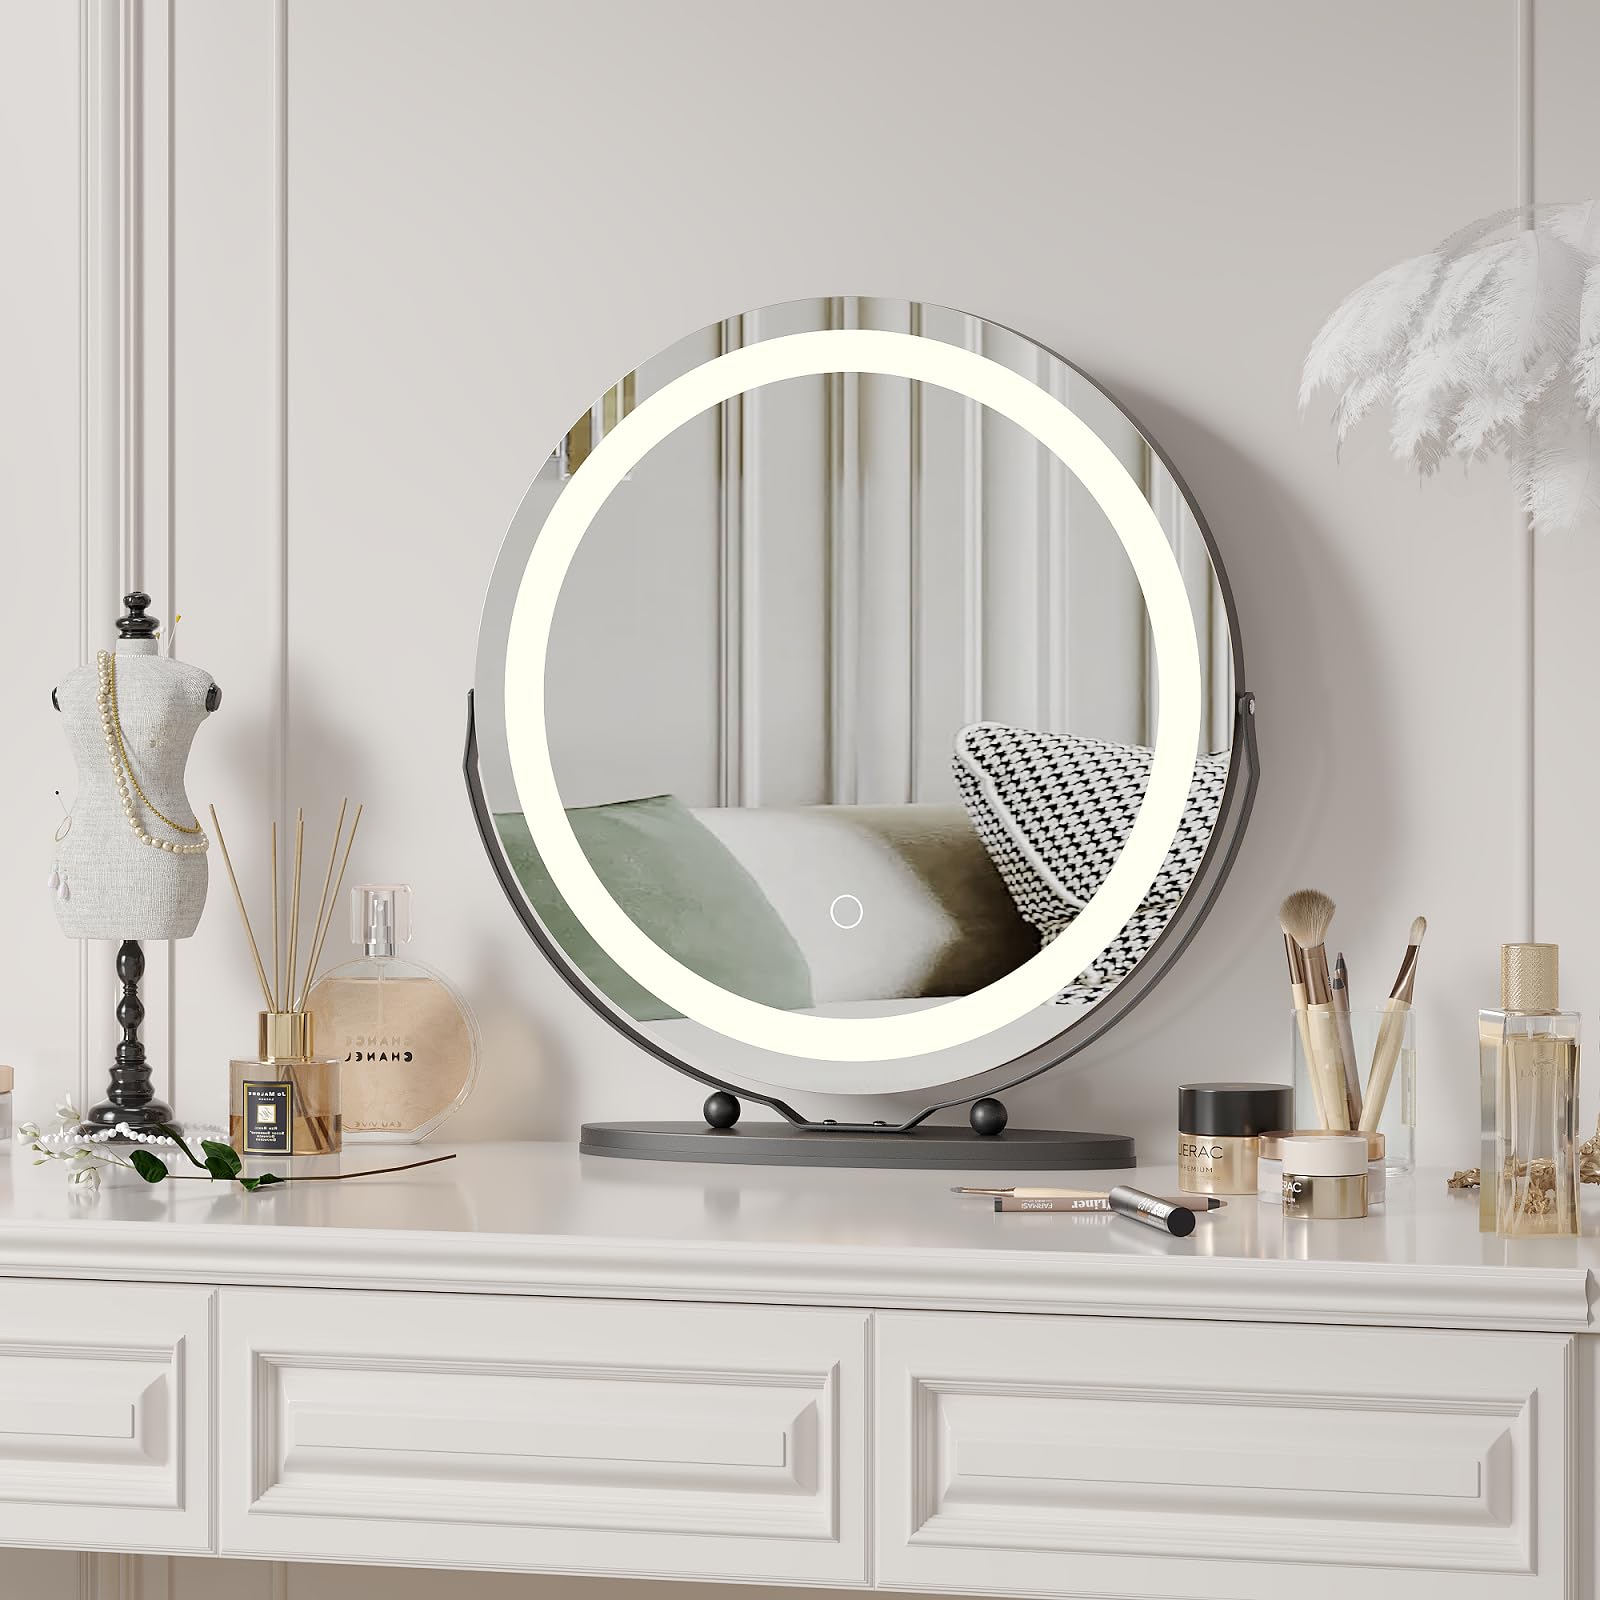 IDEALHOUSE Large 19-inch Vanity Makeup Mirror with Lights, Touch Control 3 Color Lighting Dimmable Makeup Mirror, Impeccable Illumination for Professional Makeup, 360° Rotatable Design